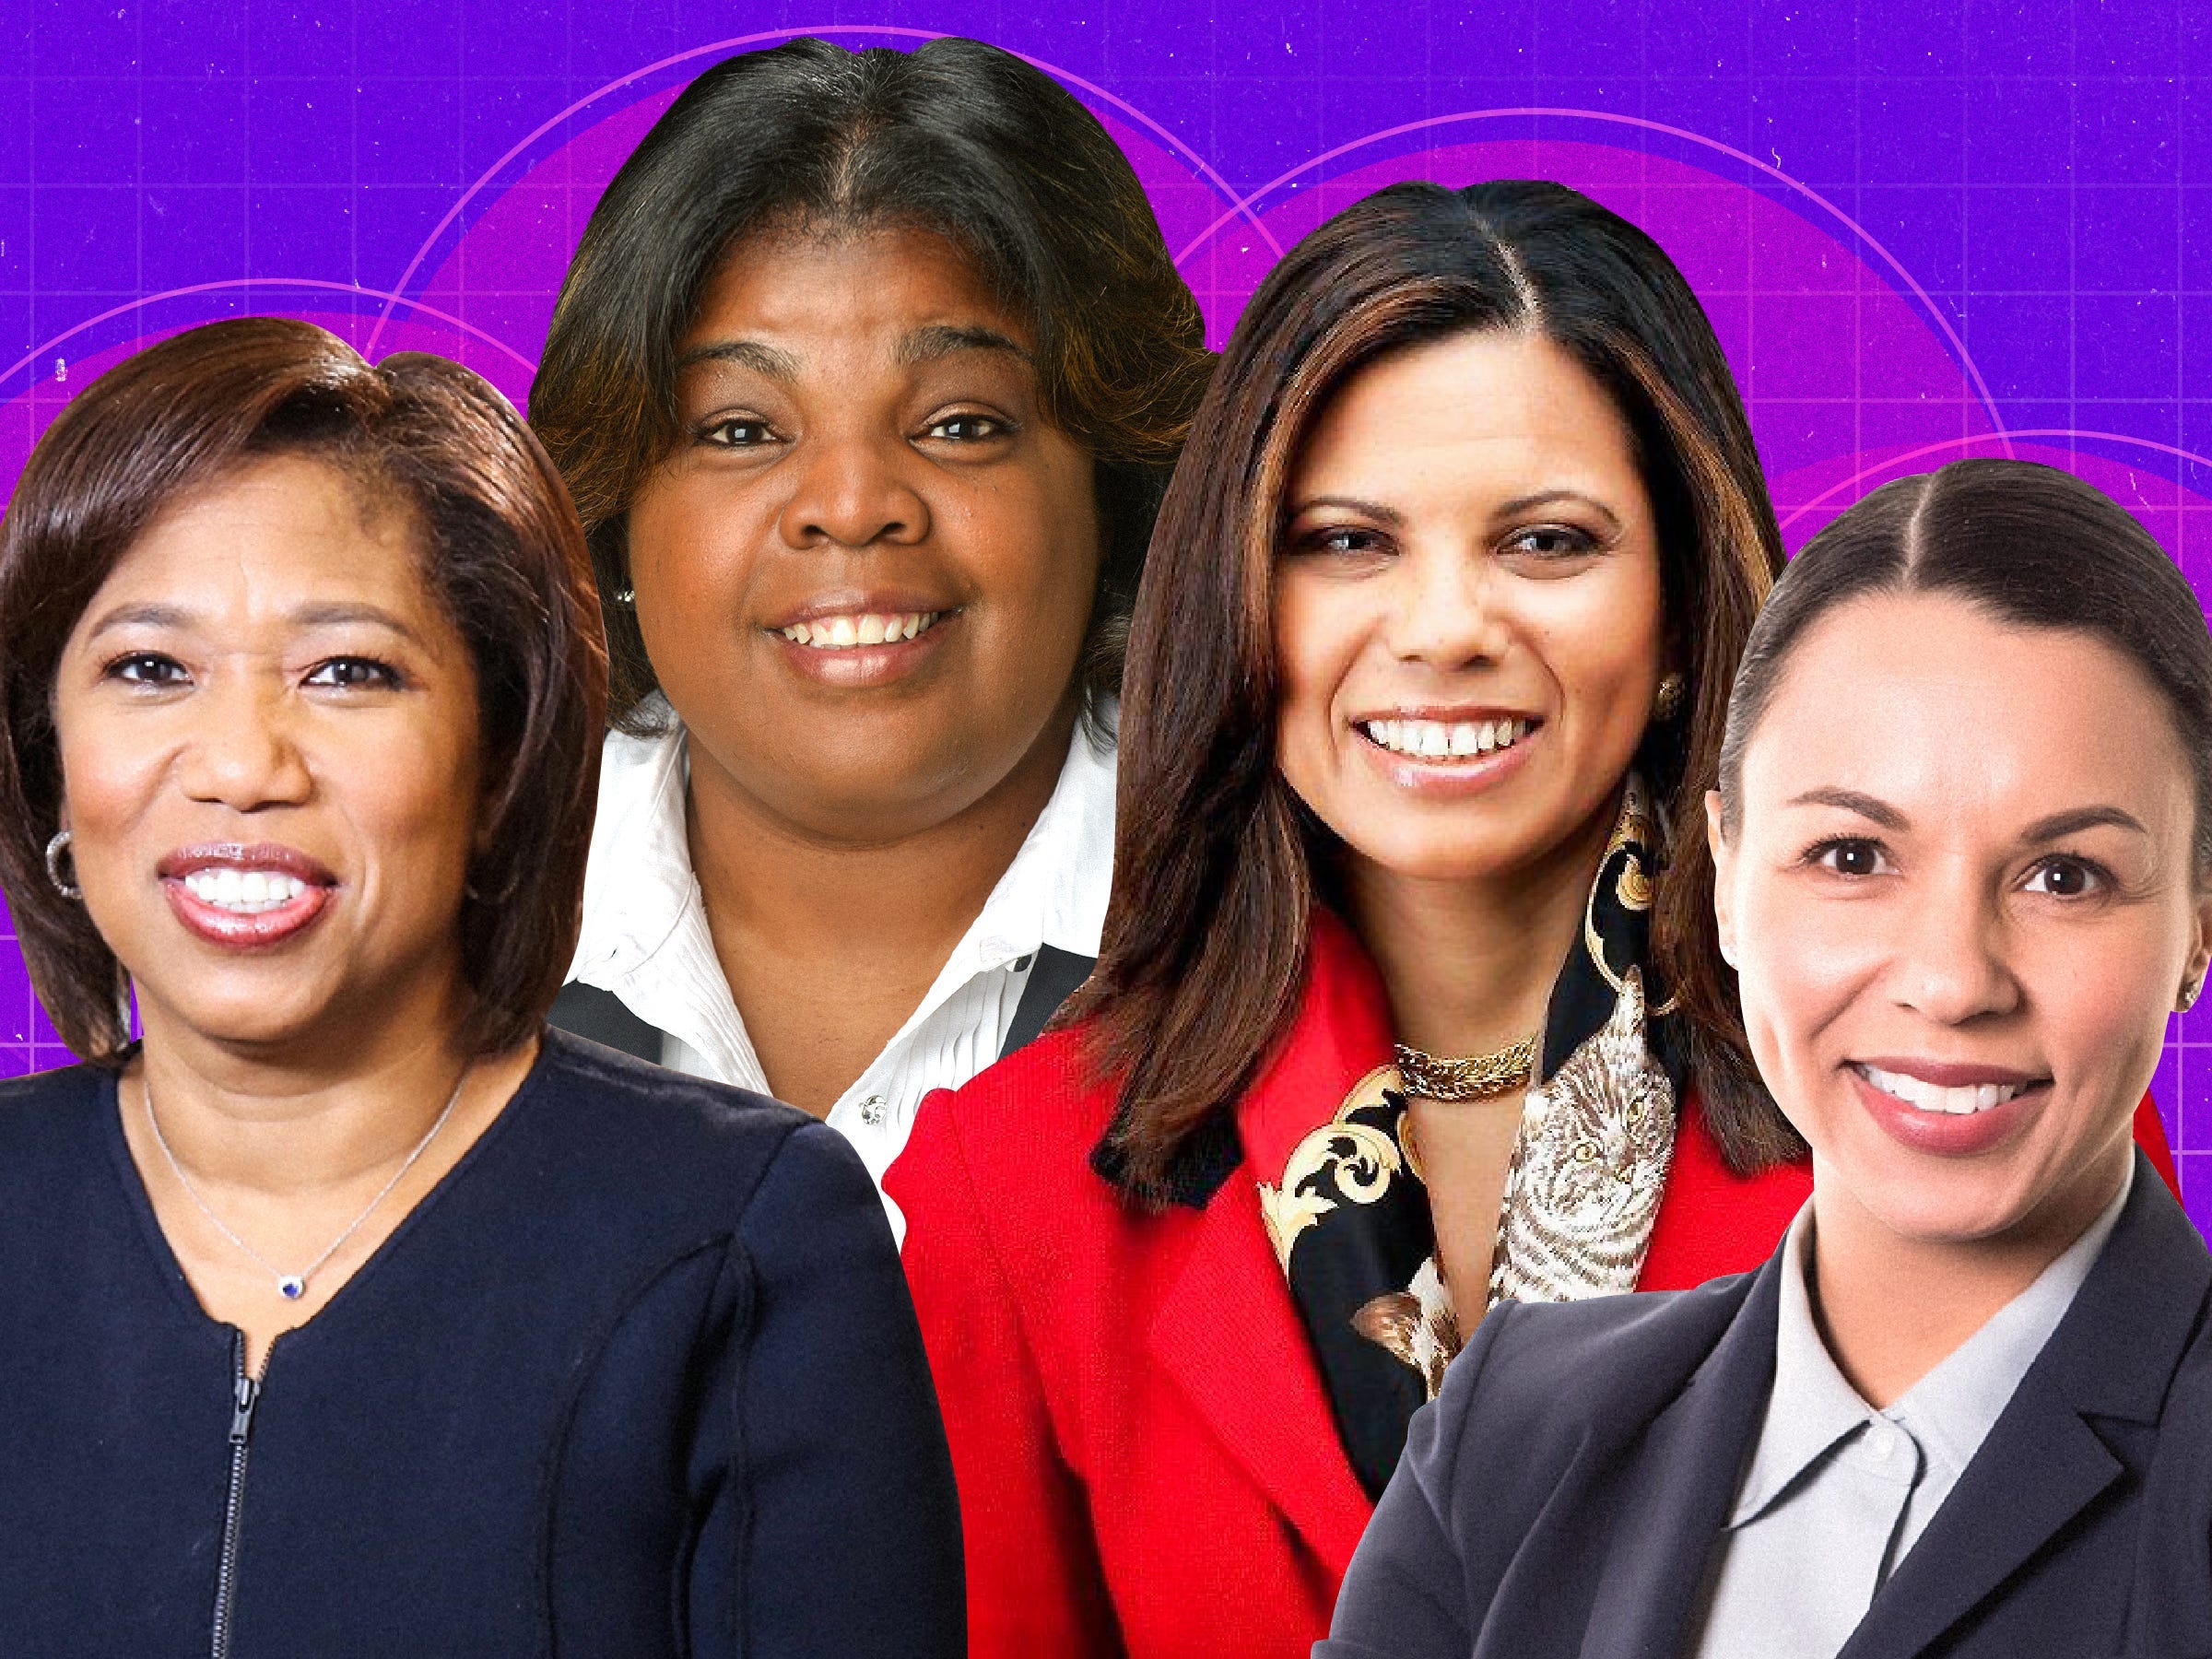 From left: Kim Lew, president and CEO of the Columbia Investment Management Company, Dekia Scott, CIO of Southern Company, Tina Byles Williams, CEO CIO and Founder of Xponance, and Michaela Edwards, partner and portfolio manager at Capricorn Investment Group with magenta circles and a faded white grid behind them on a purple background